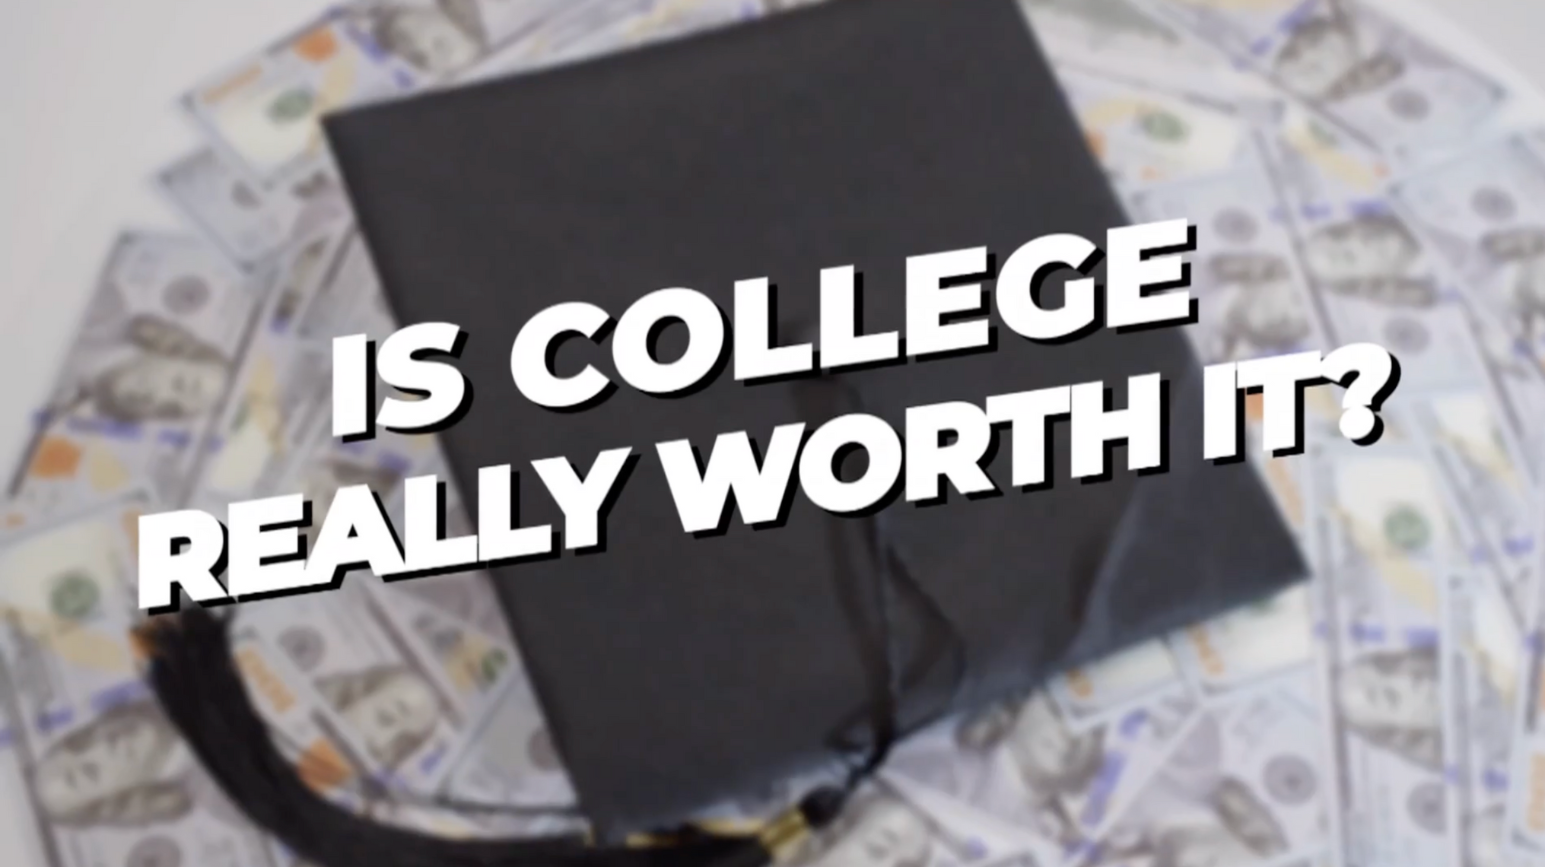 Is Higher Education Worth It?